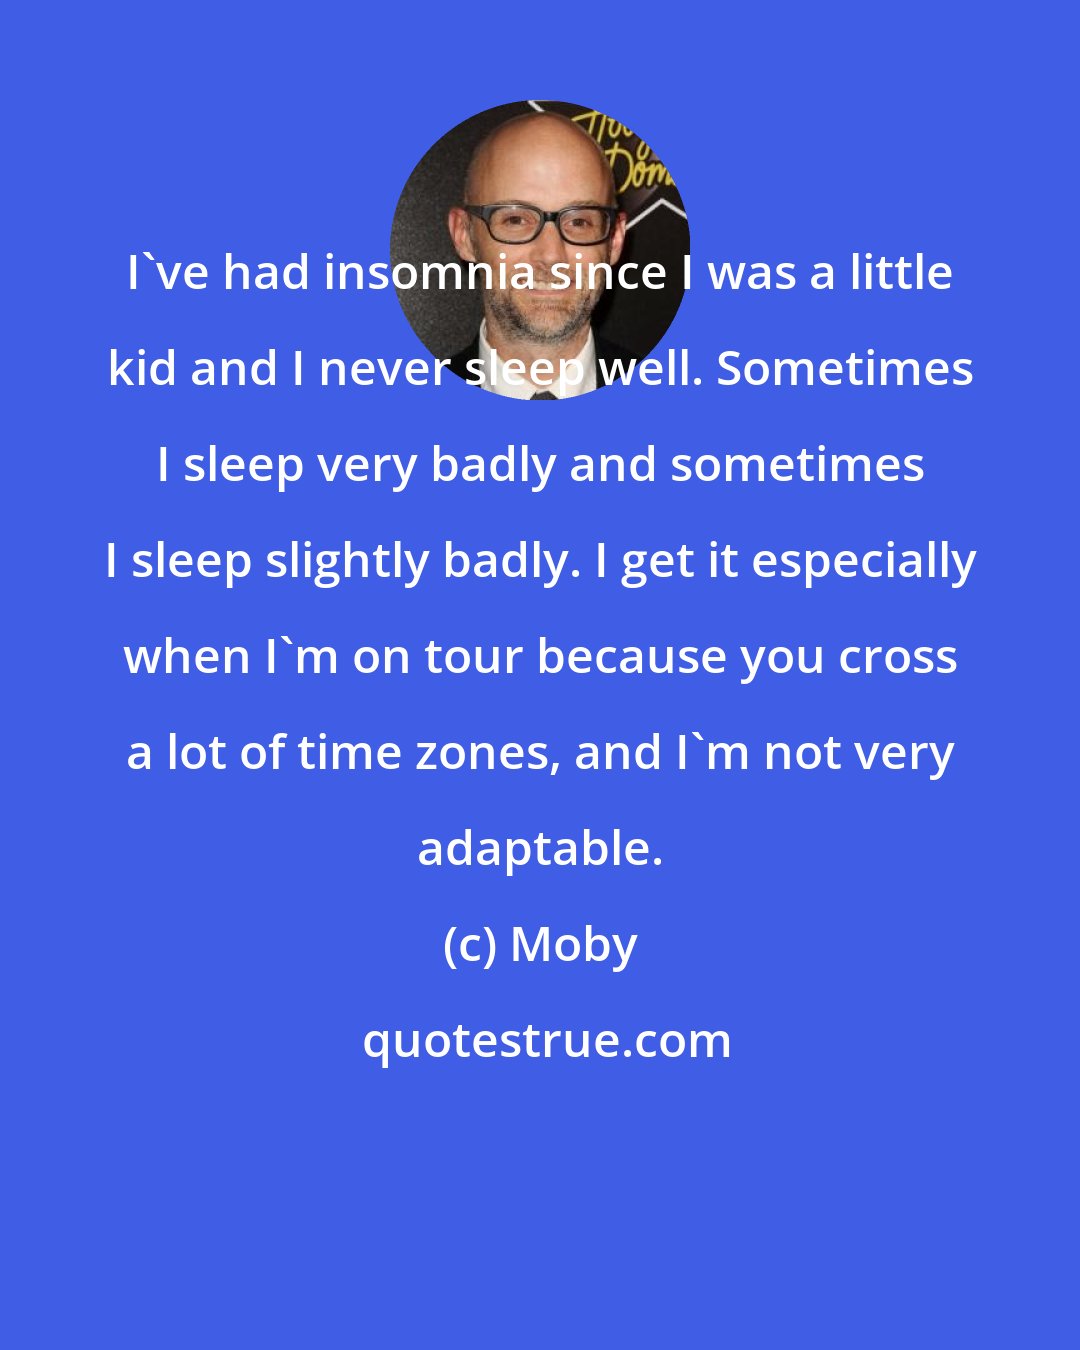 Moby: I've had insomnia since I was a little kid and I never sleep well. Sometimes I sleep very badly and sometimes I sleep slightly badly. I get it especially when I'm on tour because you cross a lot of time zones, and I'm not very adaptable.